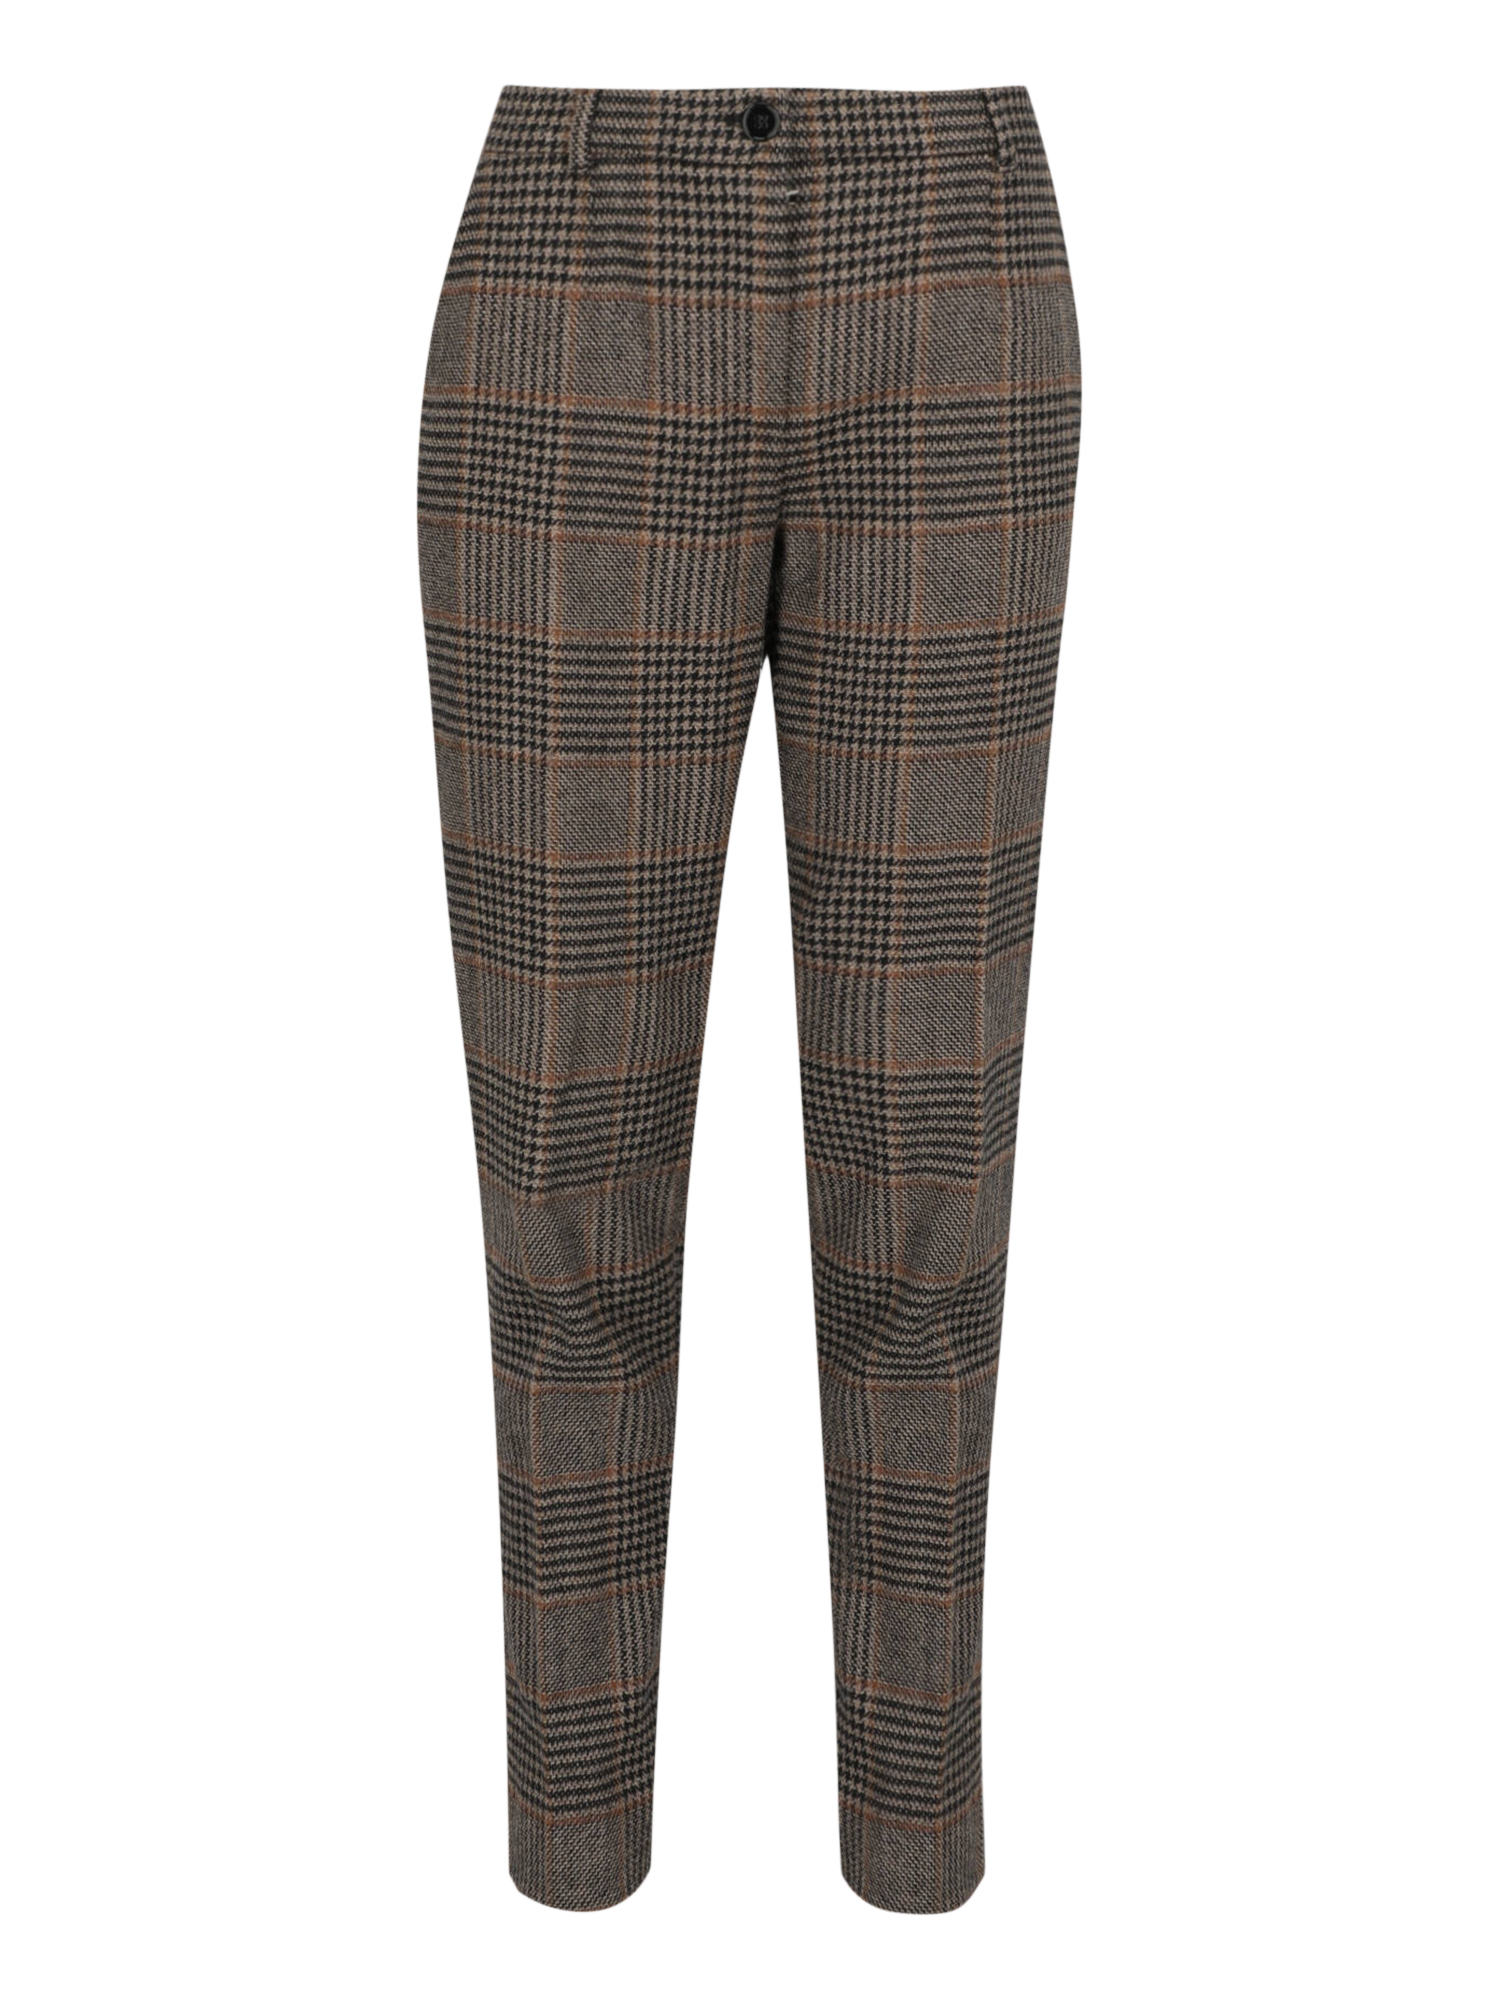 Pre-owned Dolce & Gabbana Women's Trousers -  - In Brown Wool